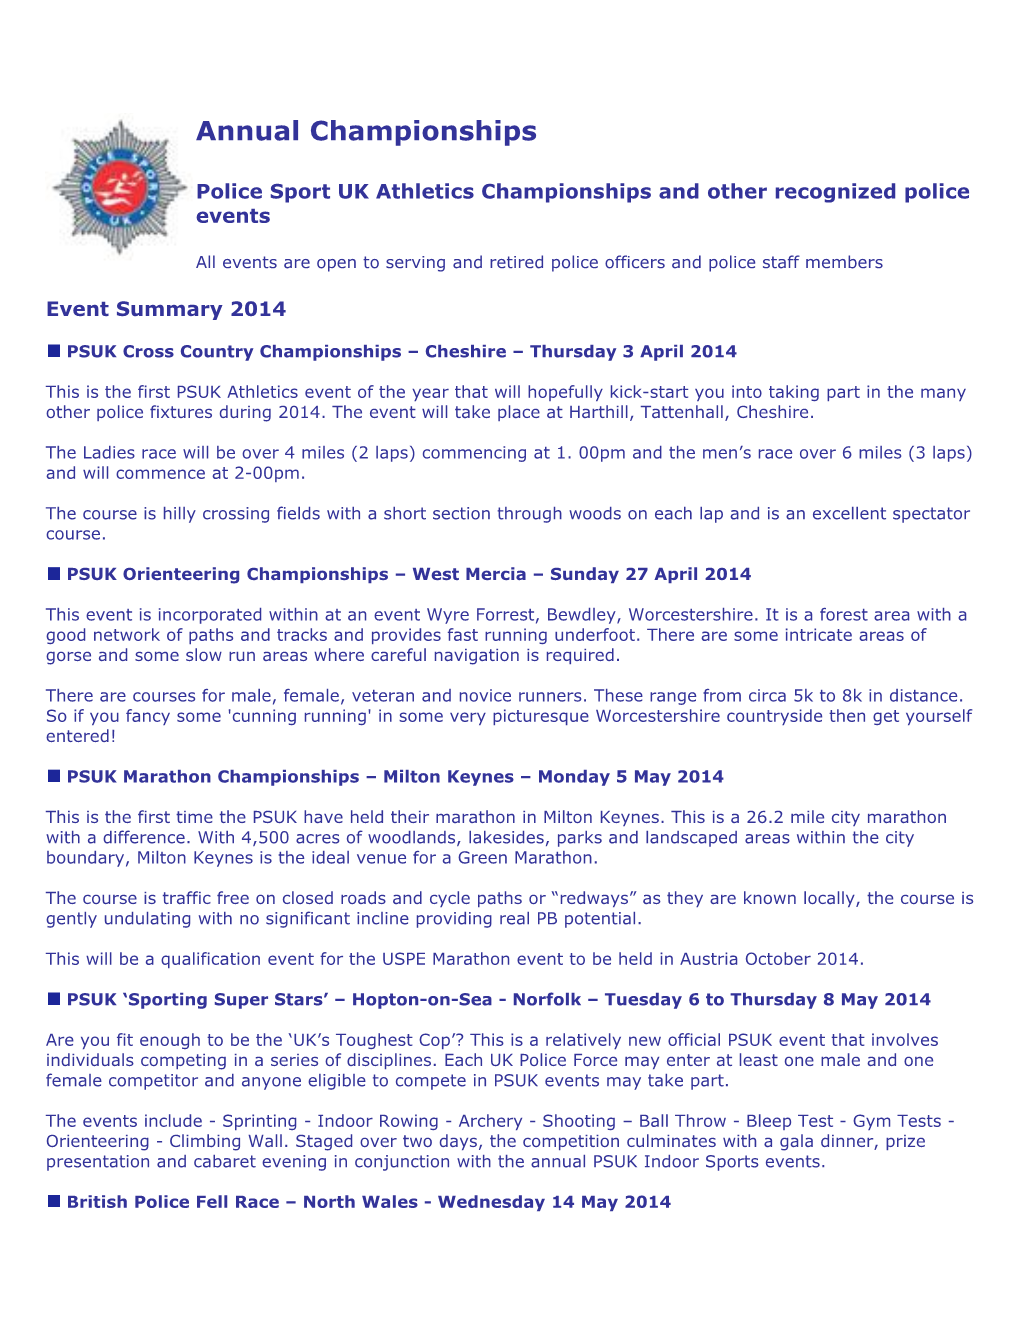 Police Sport UK Athletics Championships and Other Recognized Police Events